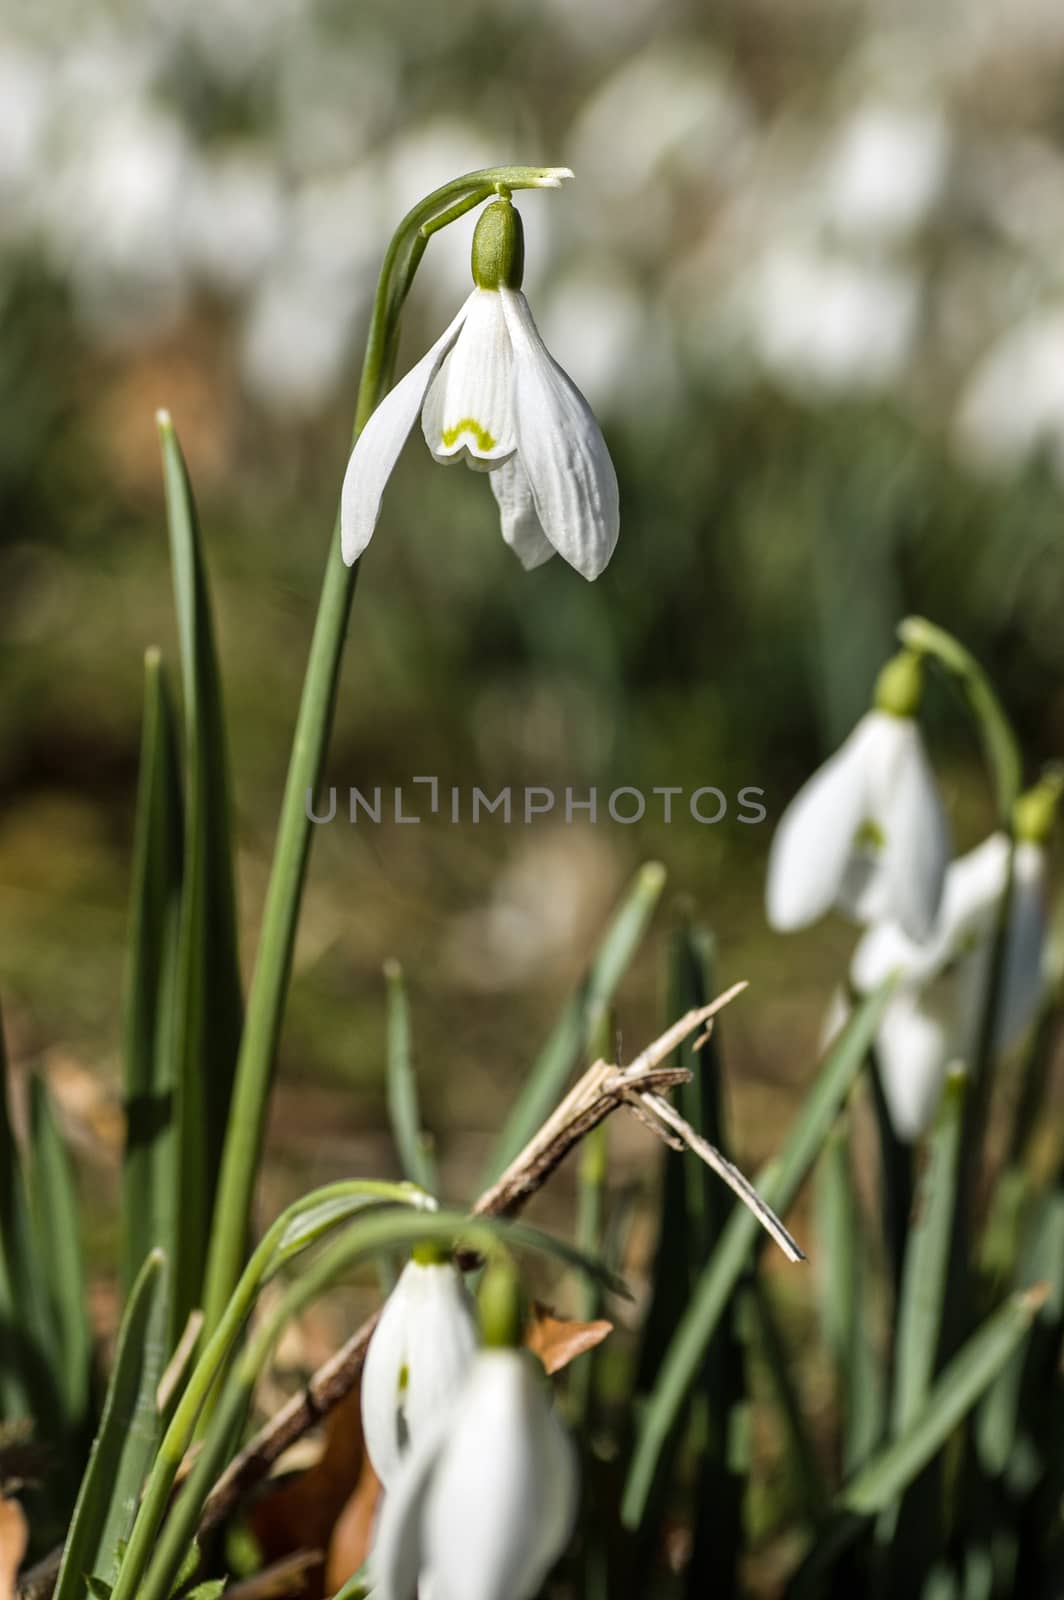 Close up image of a wild snowdrop flower in Spring.